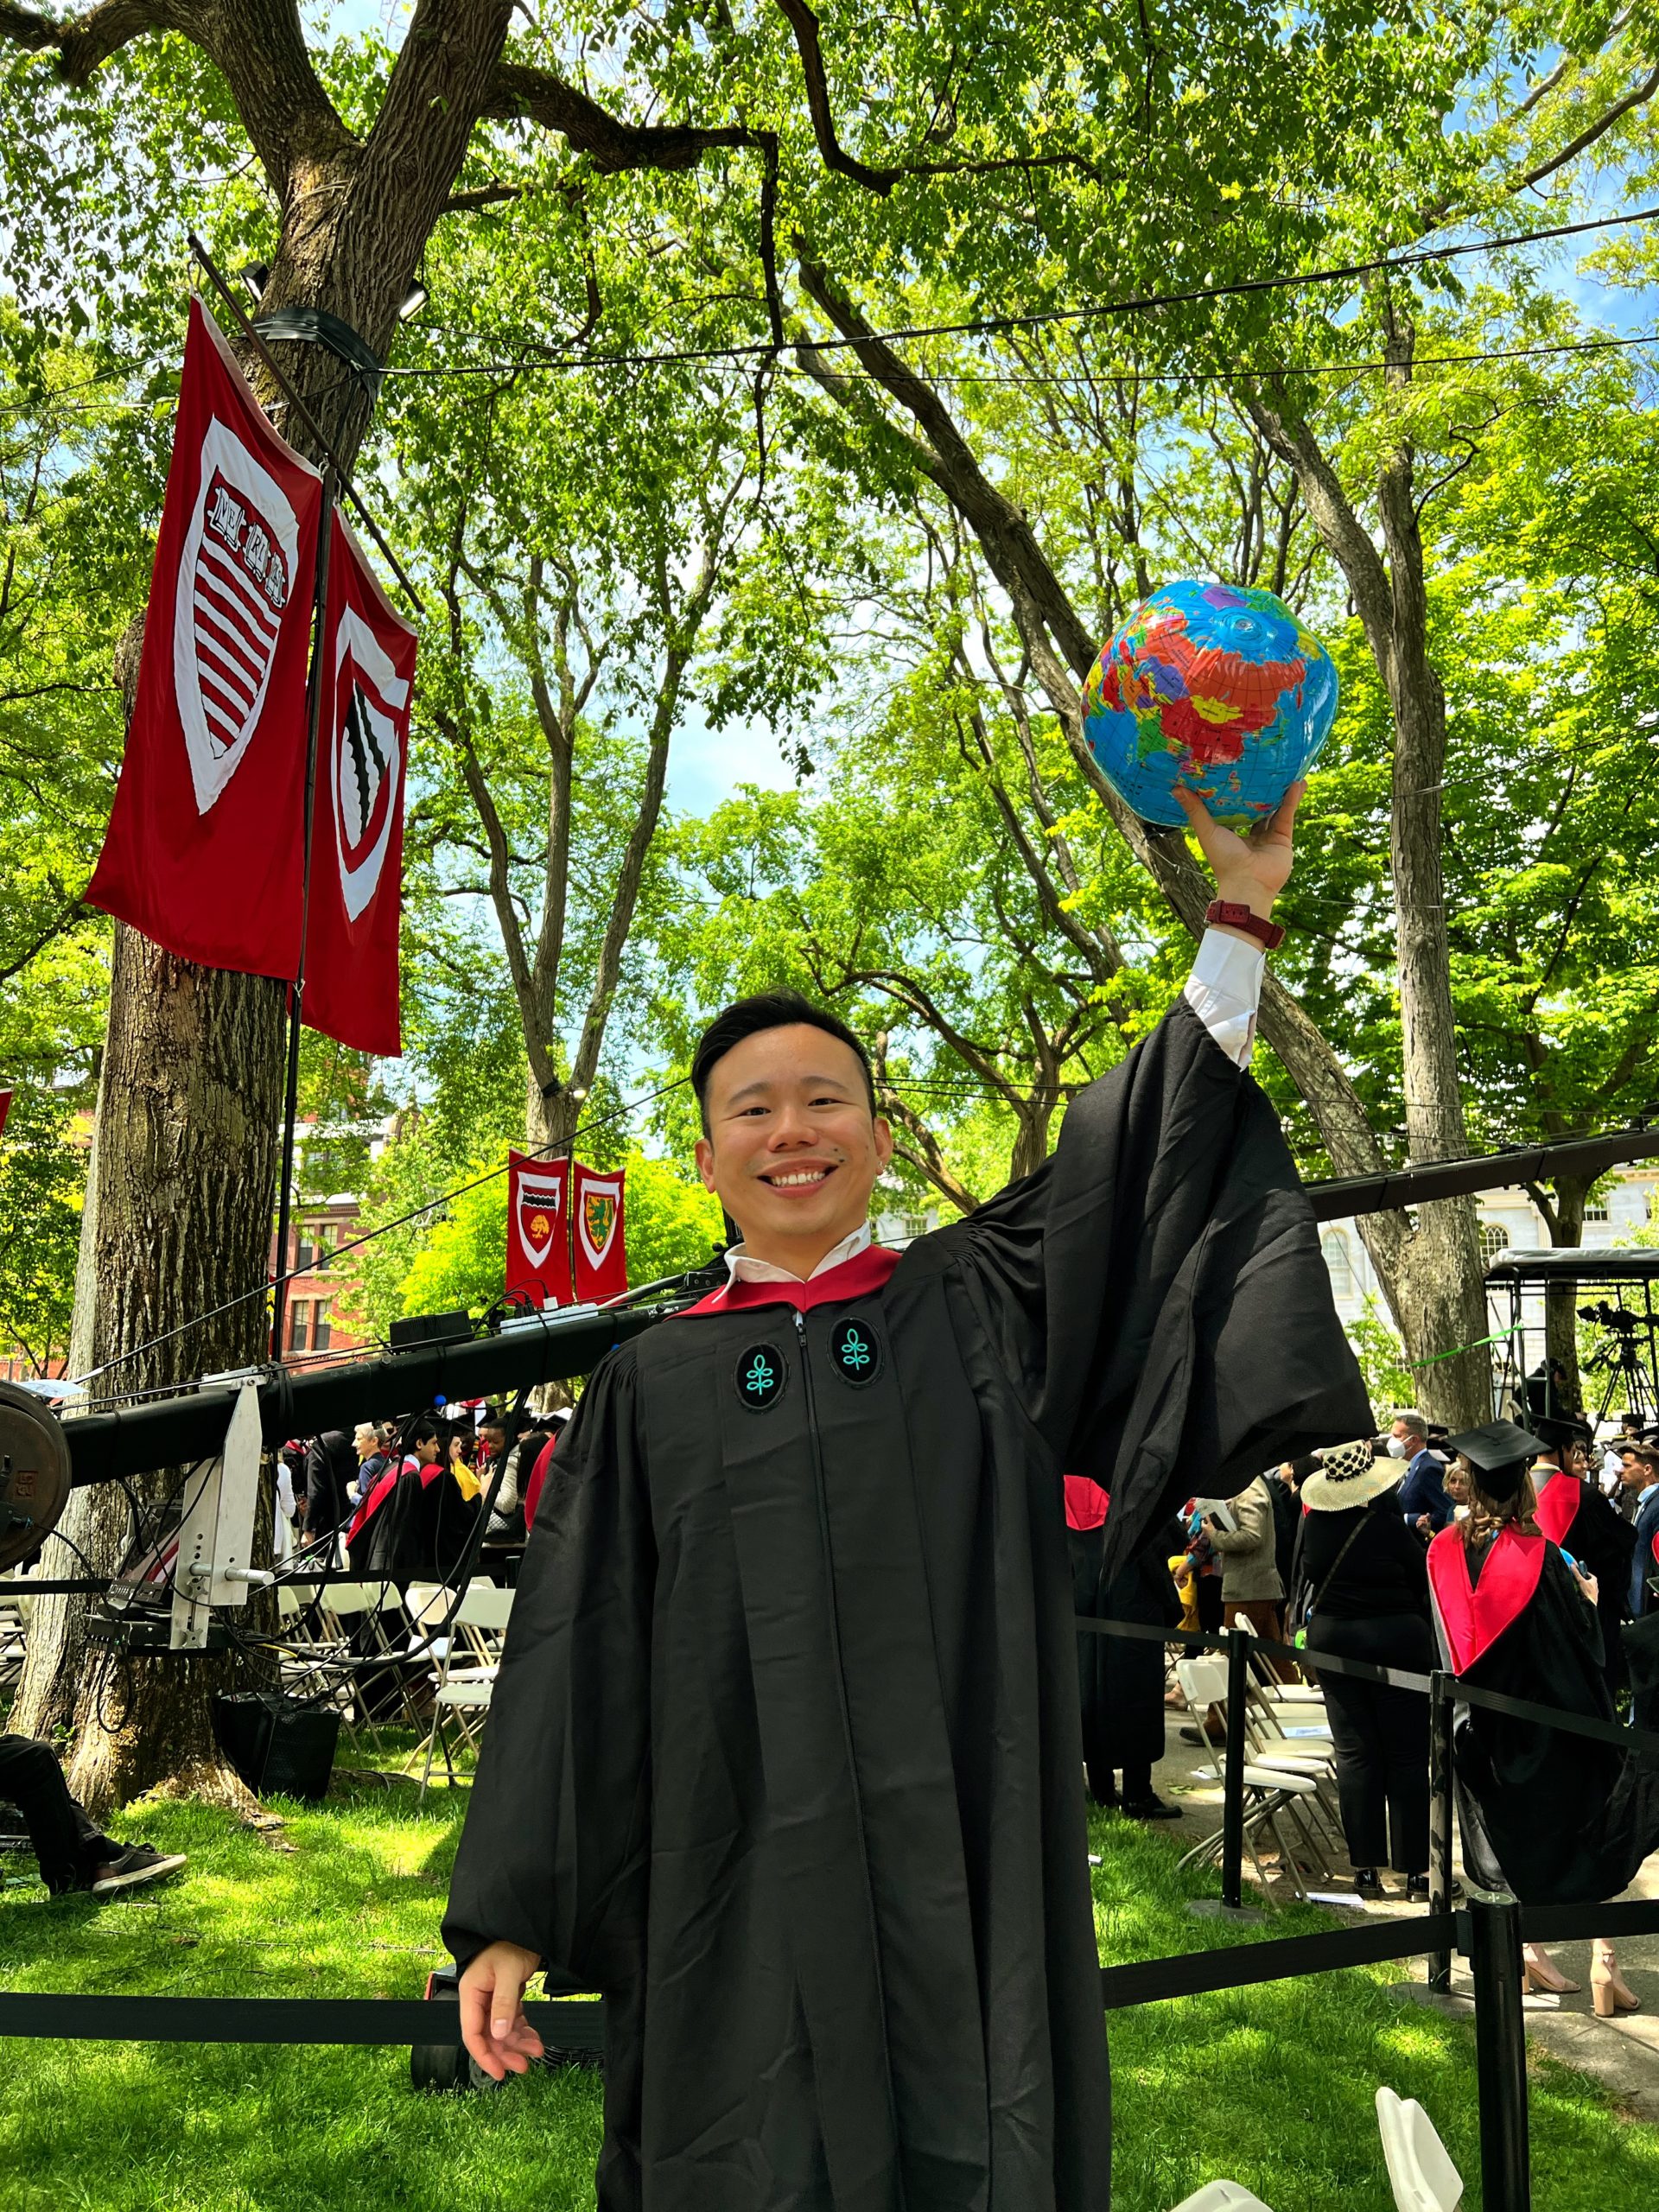 Meet andrew loh, the harvard graduate who's bringing positive change one step at a time | weirdkaya